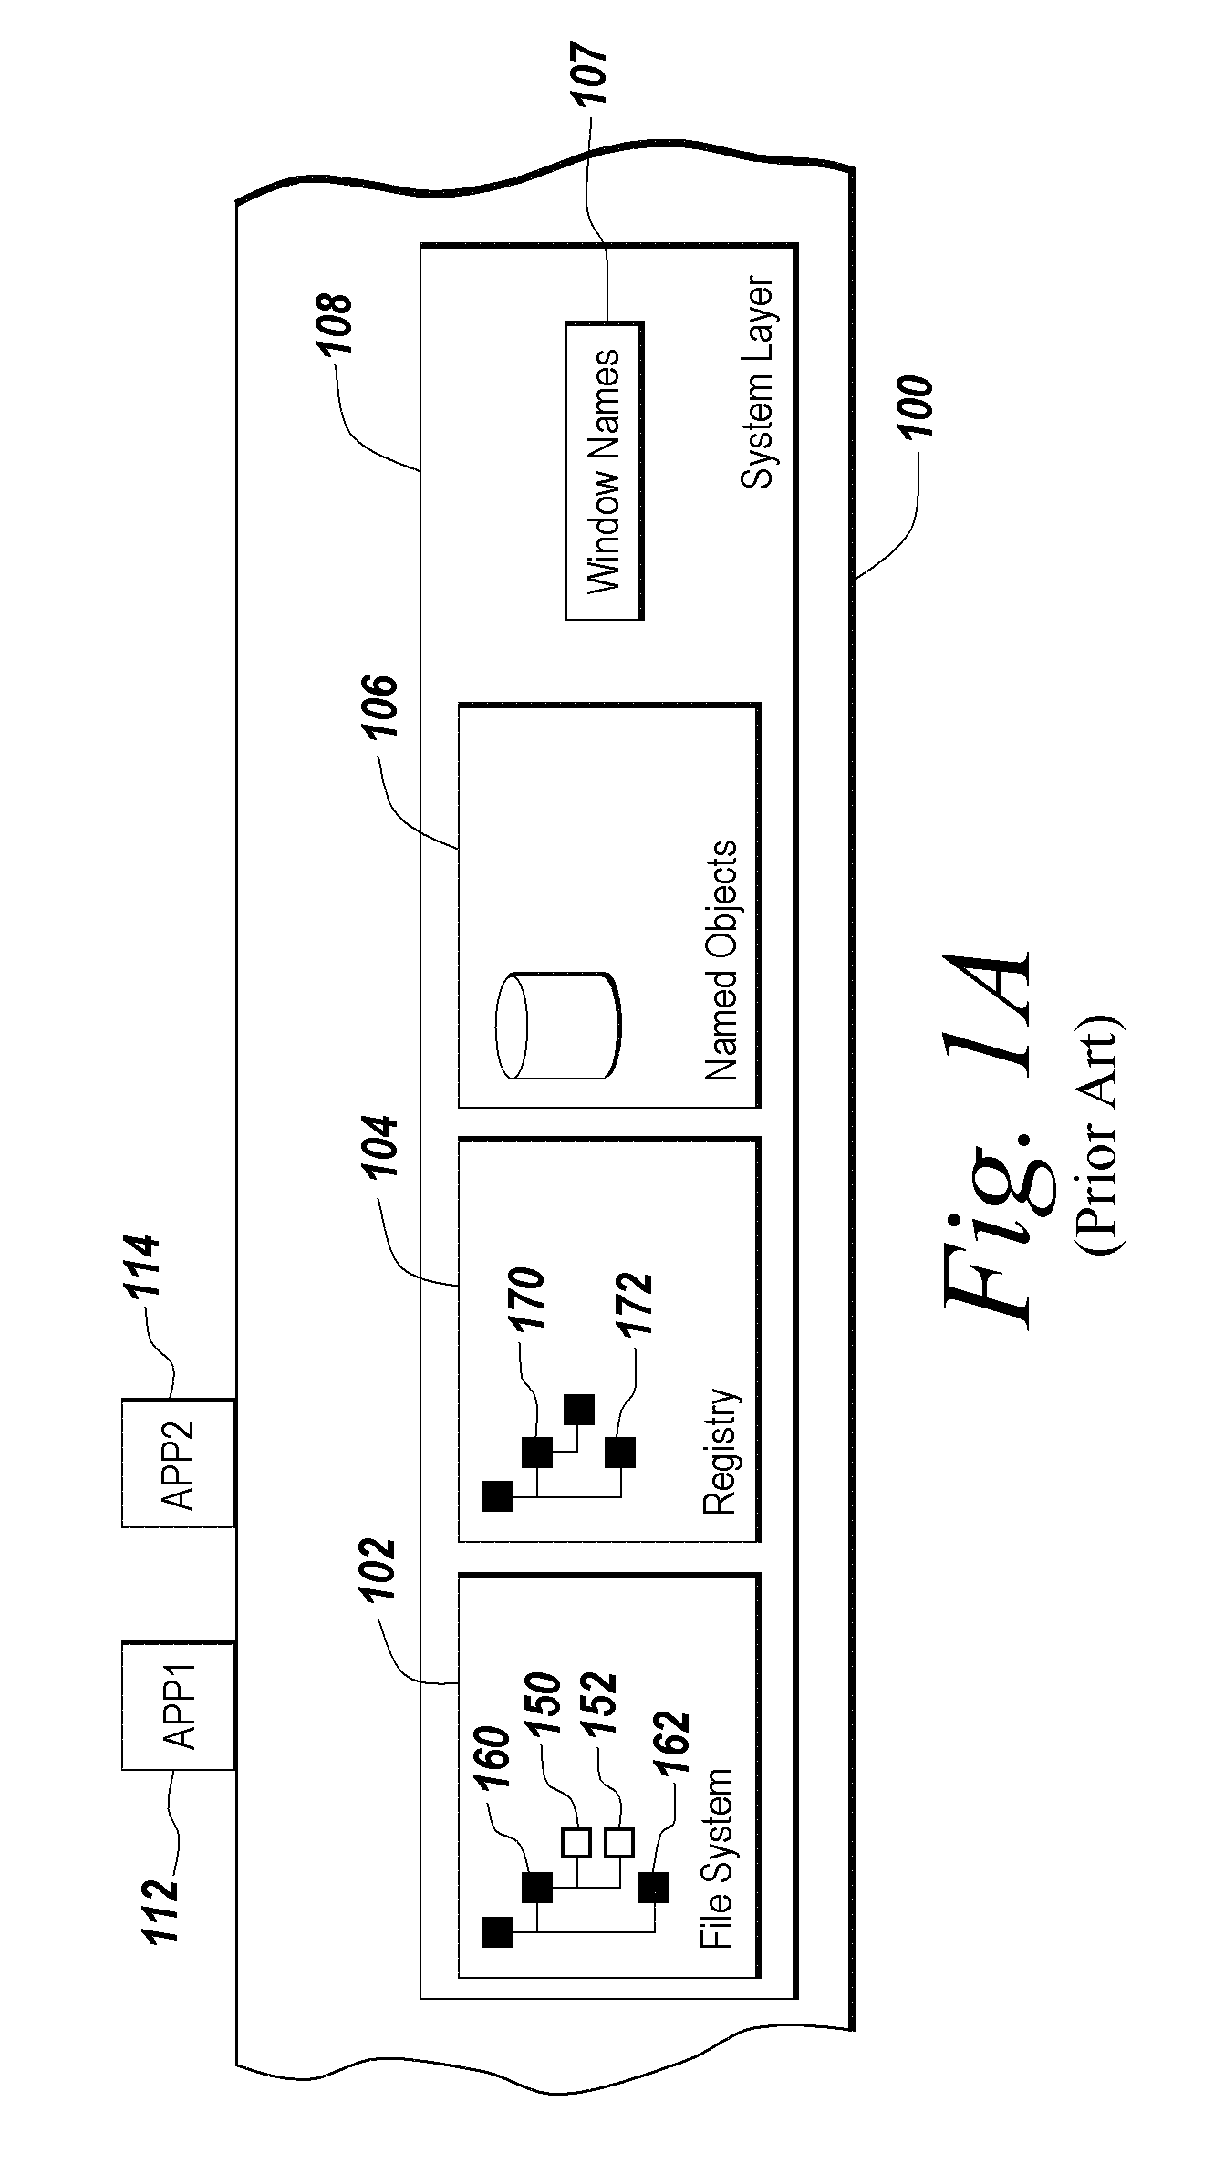 Method and apparatus for isolating execution of software applications